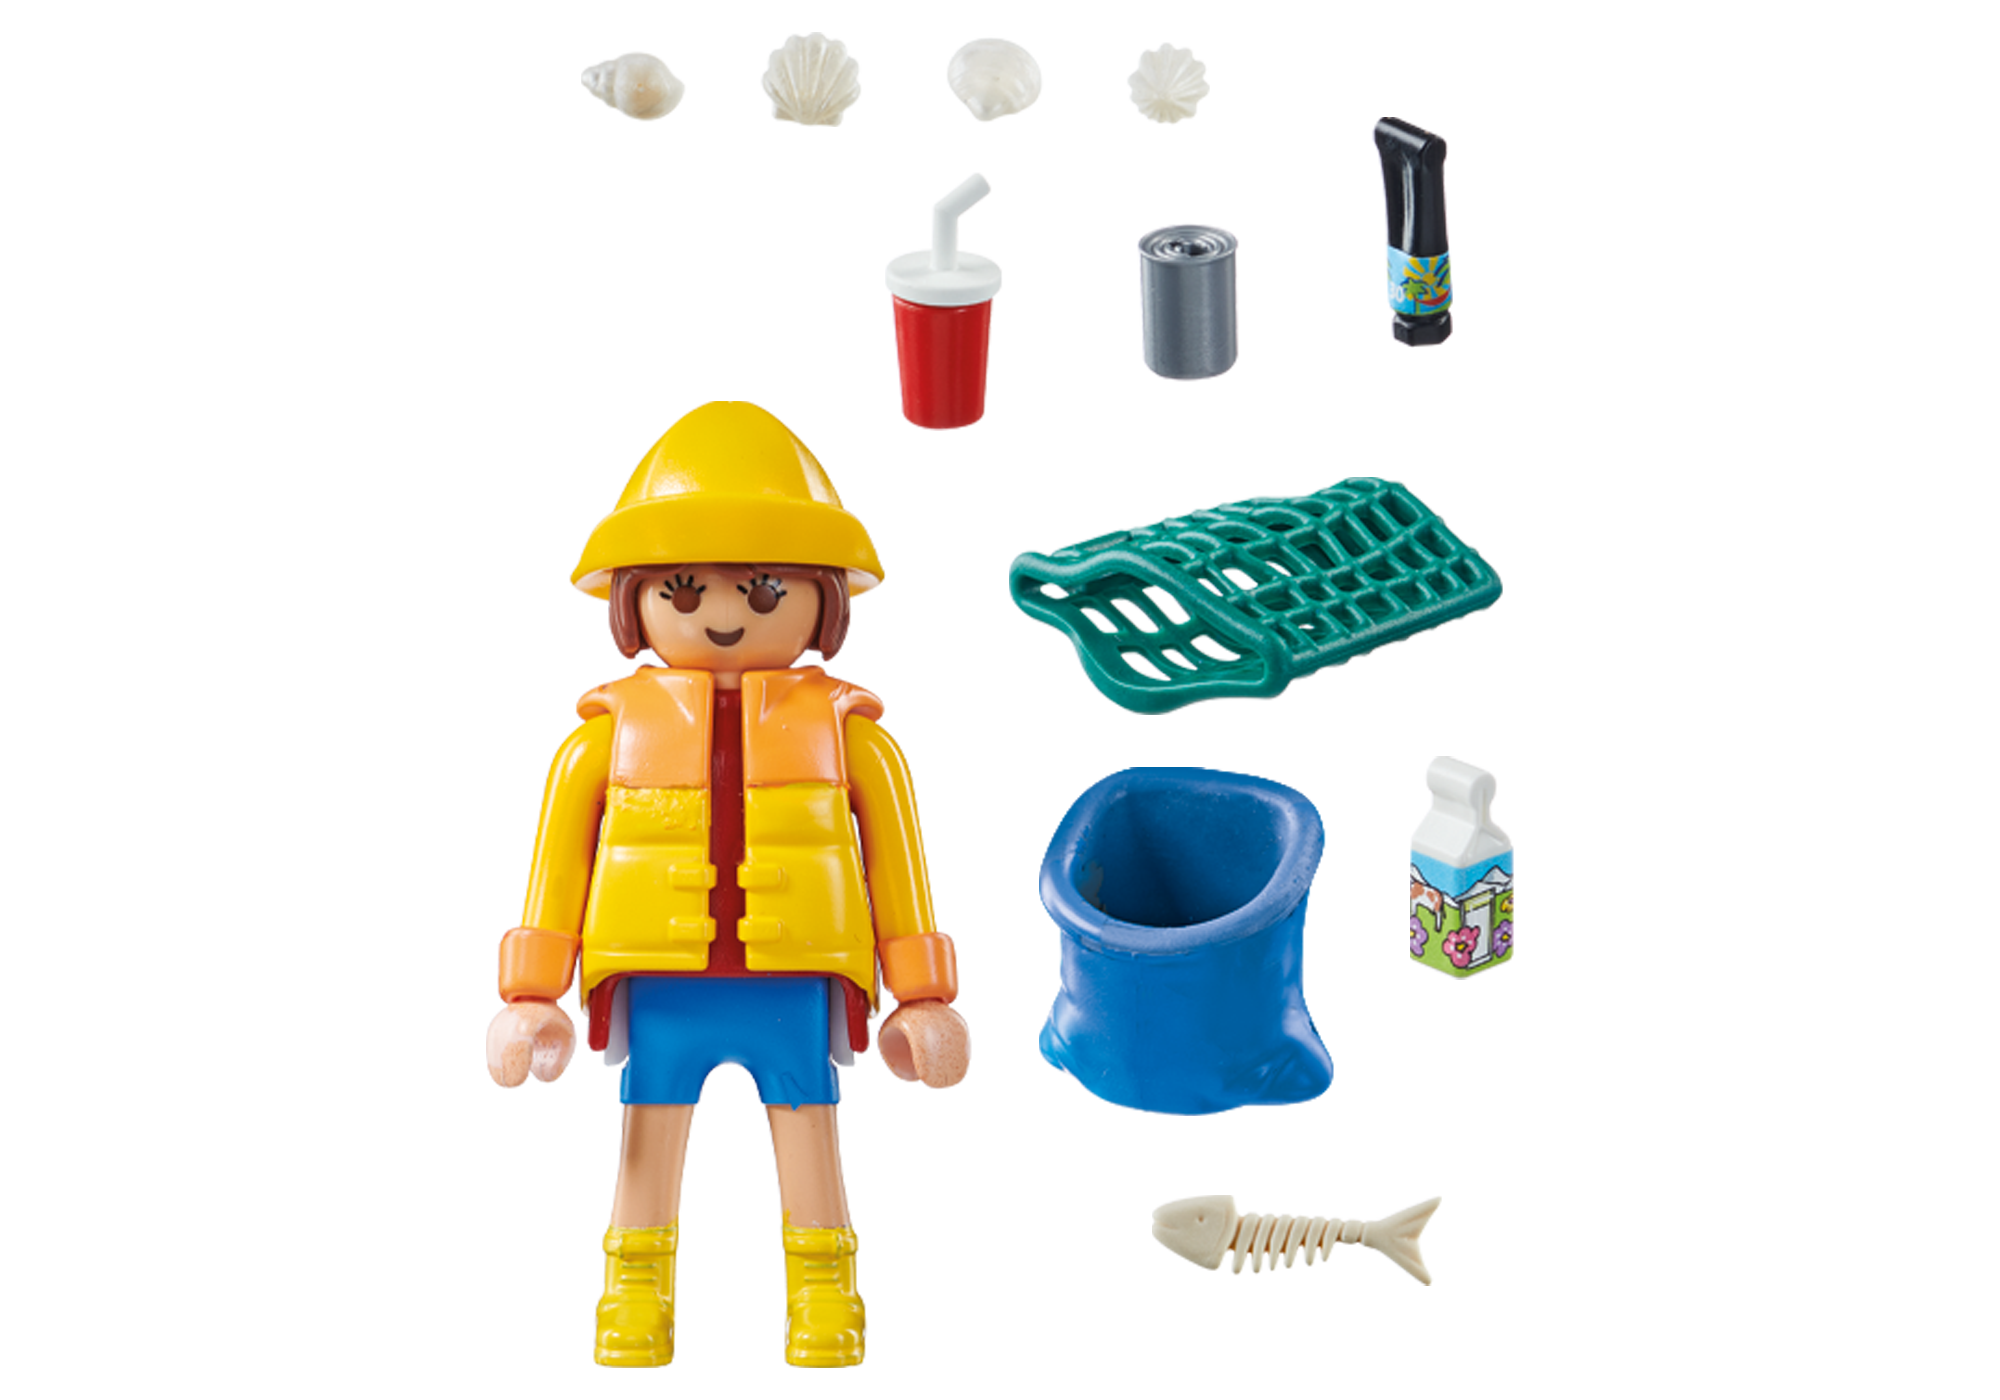 70663 playmobil rescue action - Playmobil